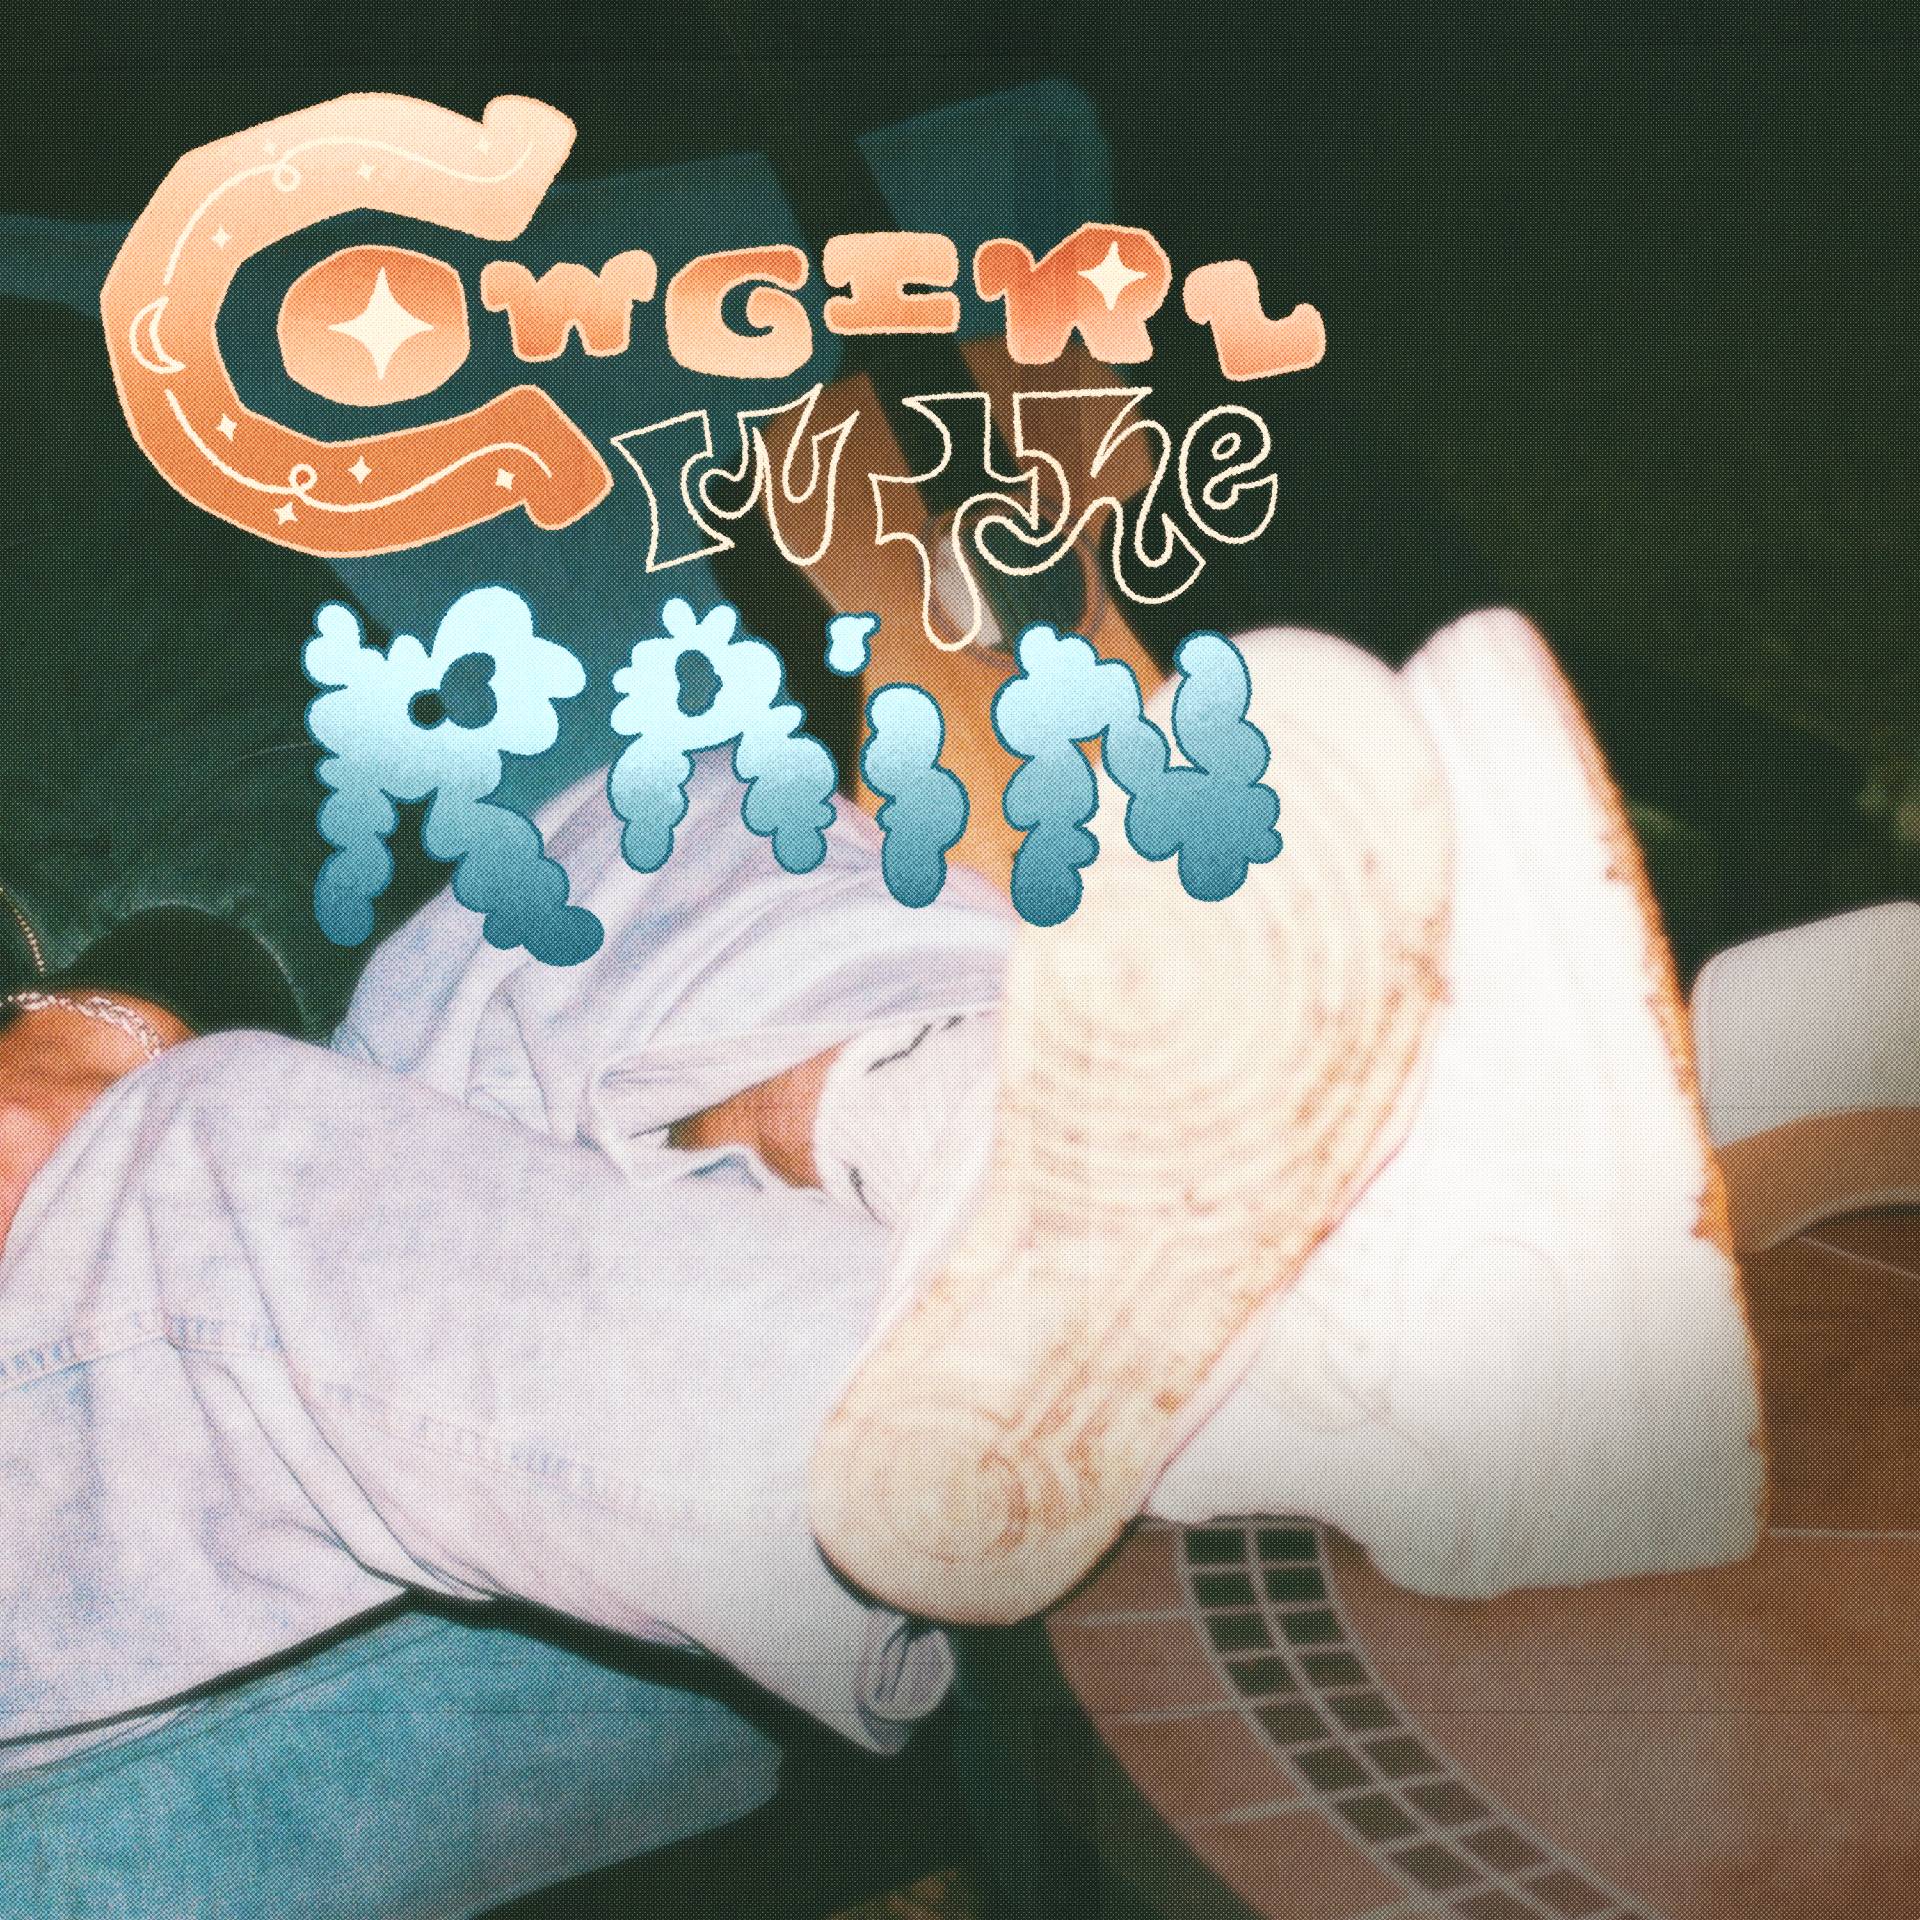 Dirty White Shoes “Cowgirl in the Rain” single artwork